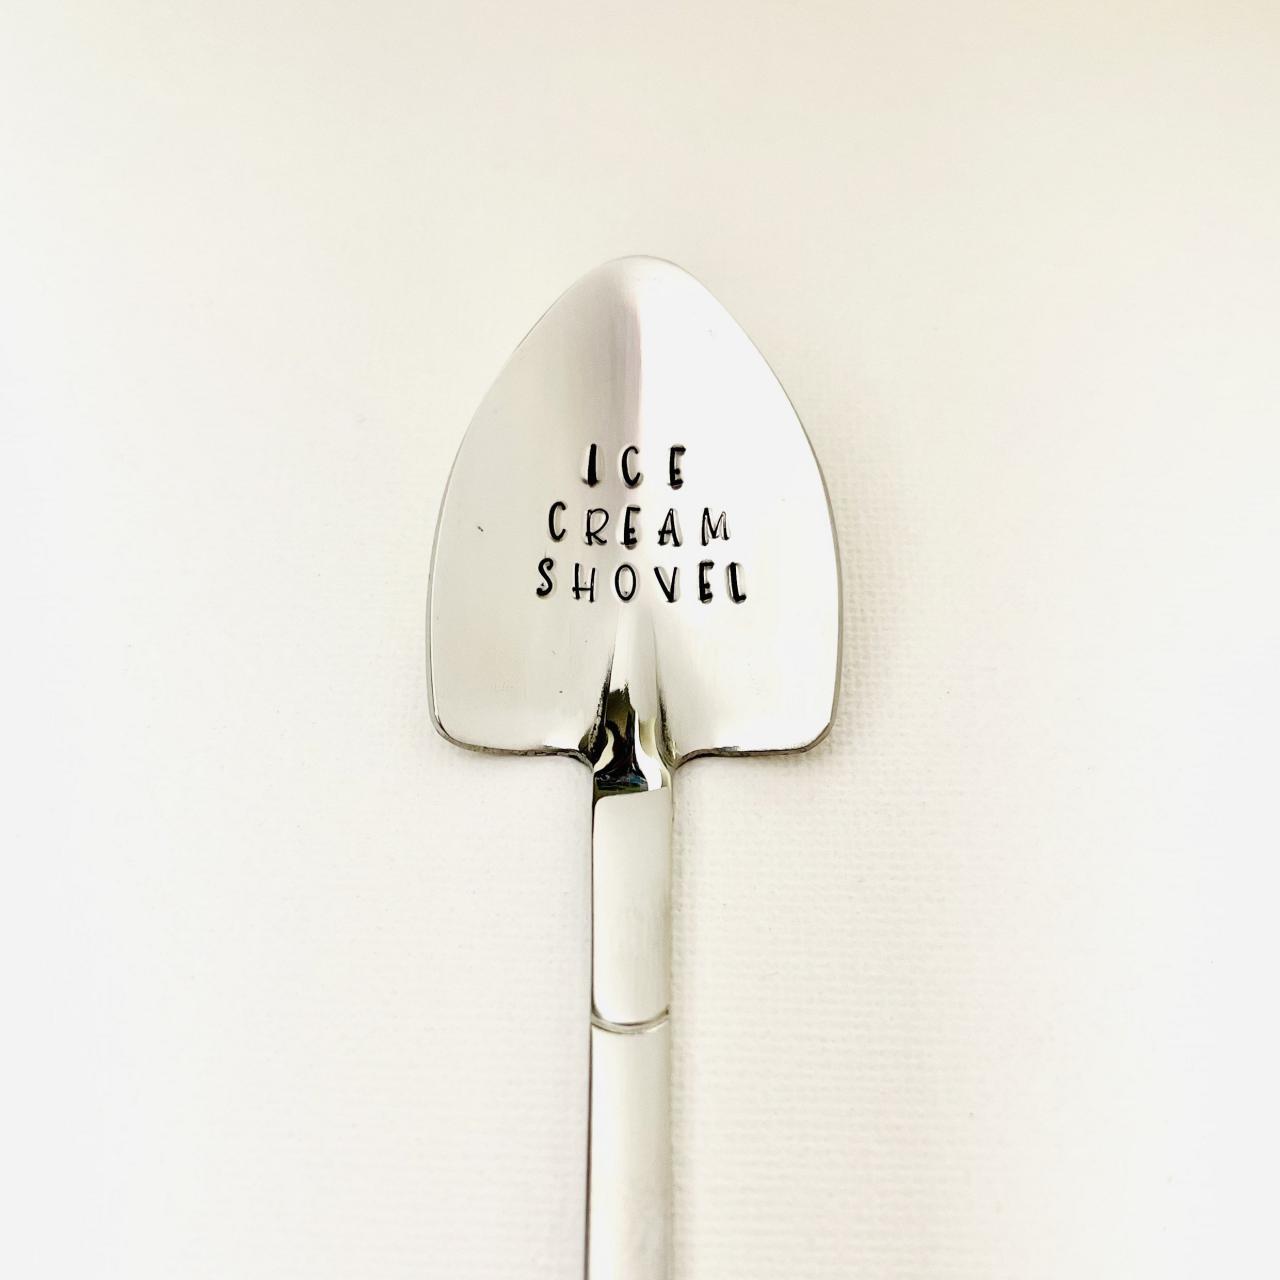 Ice Cream Shovel, Spoon, Custom, Personalized, Customizable Gift, Stamped Metal, Dad Gift, Silver Metal, Decorative Spoon